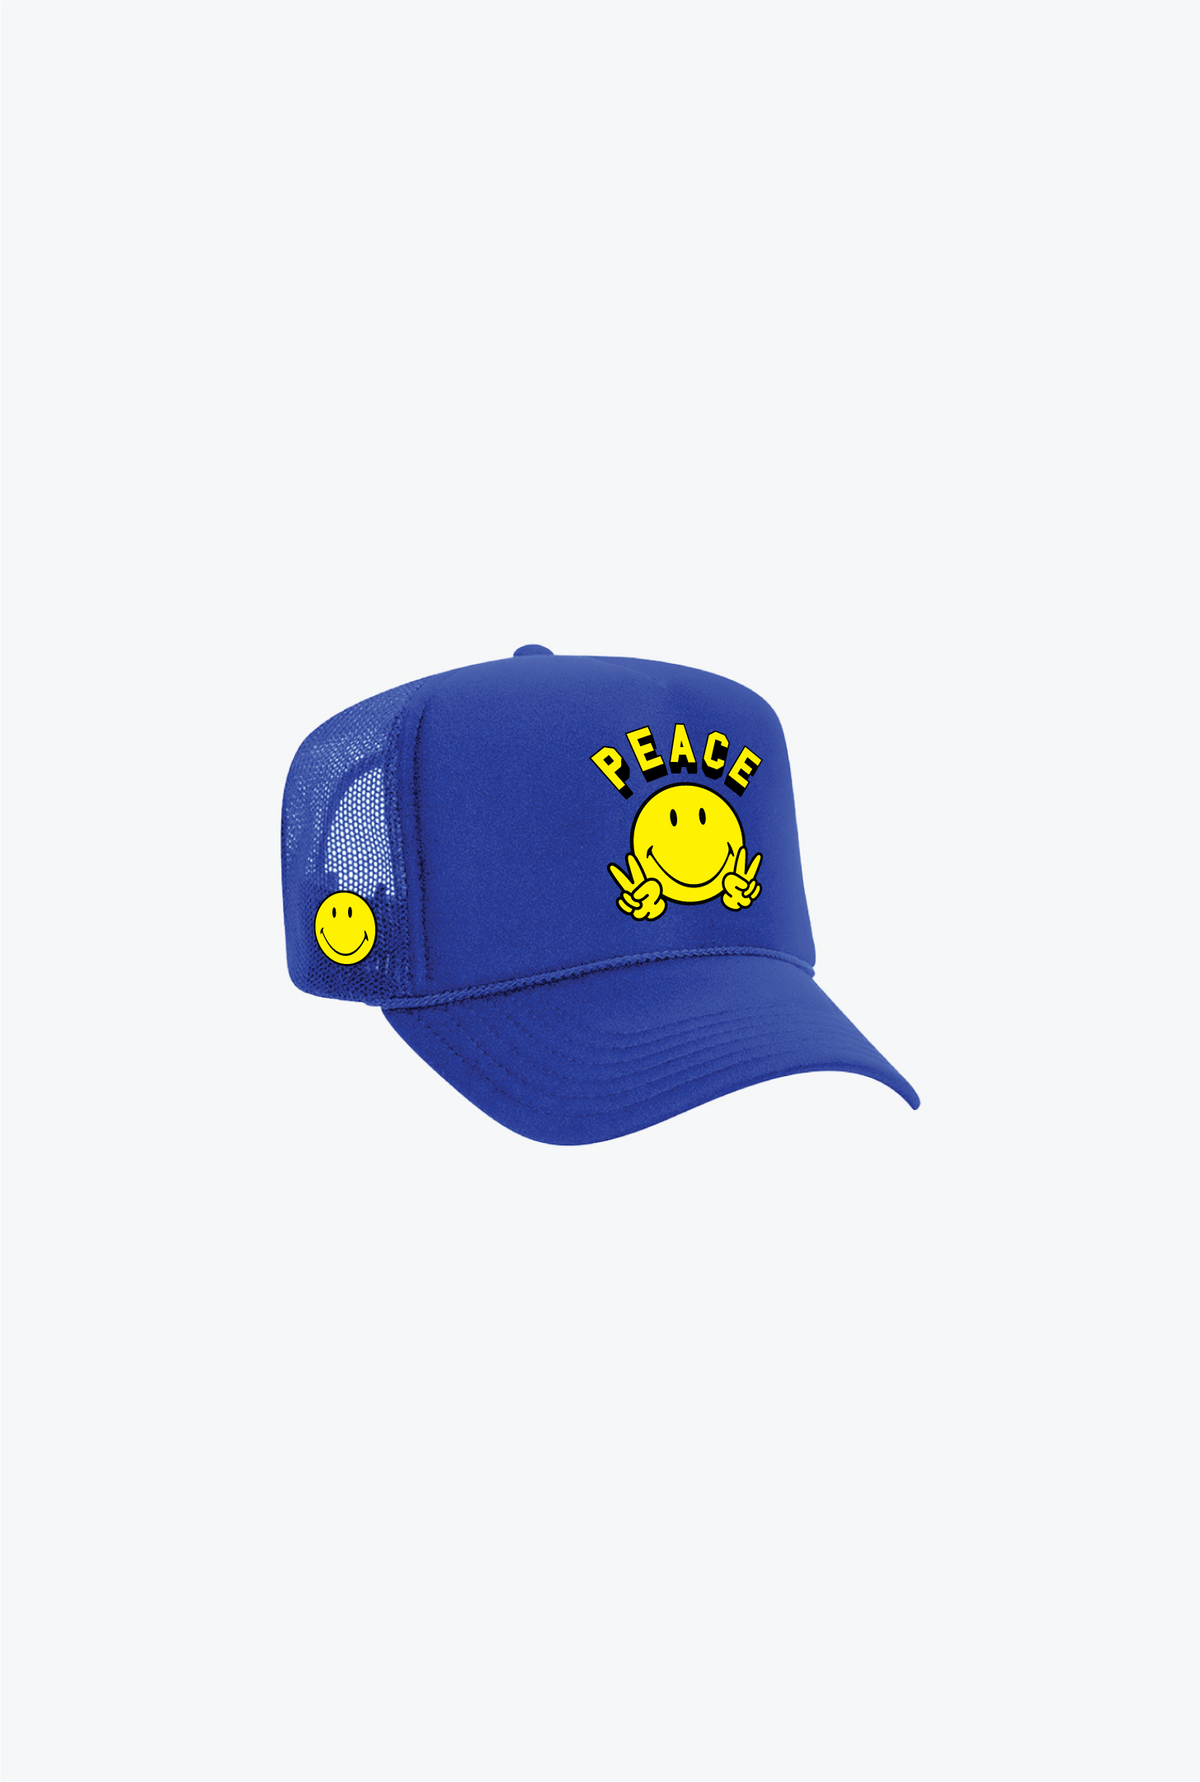 P/C x Smiley Peace Sign Trucker Hat - Royal